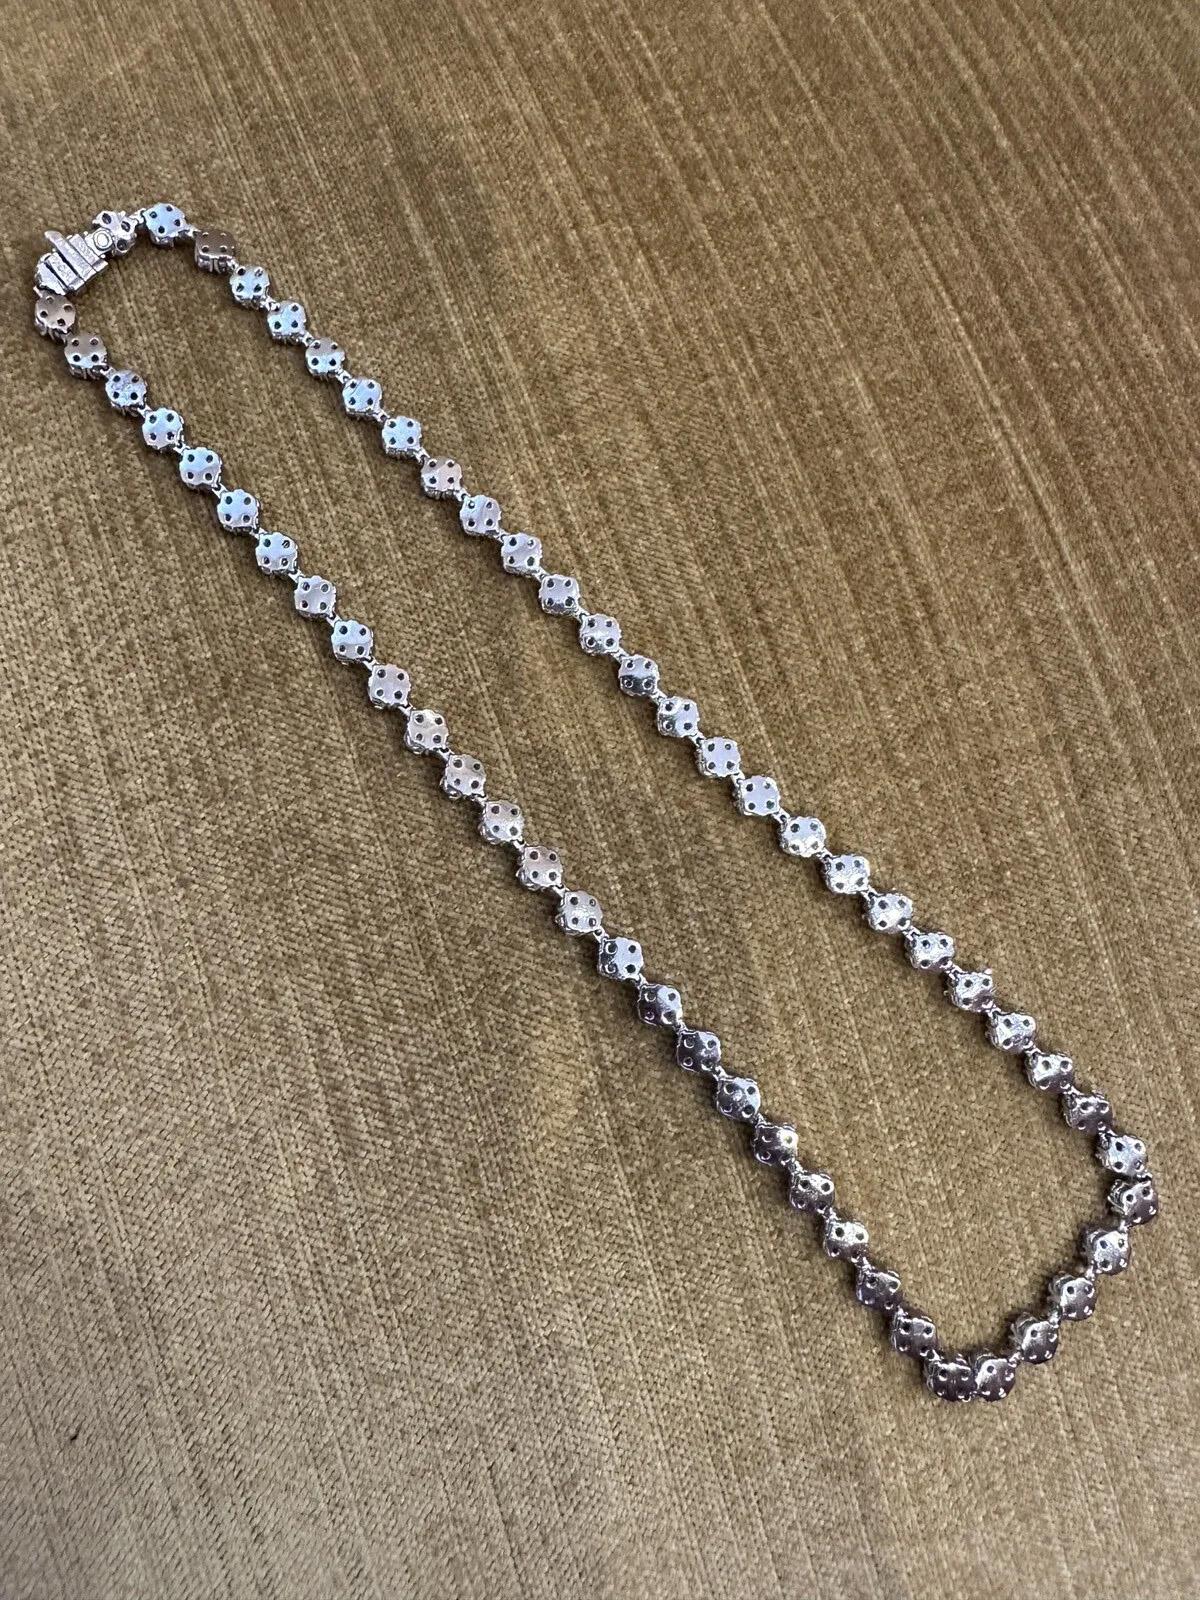 Floret Cluster Diamond Choker Necklace 10.34 Carat Total Weight in Platinum In Excellent Condition For Sale In La Jolla, CA